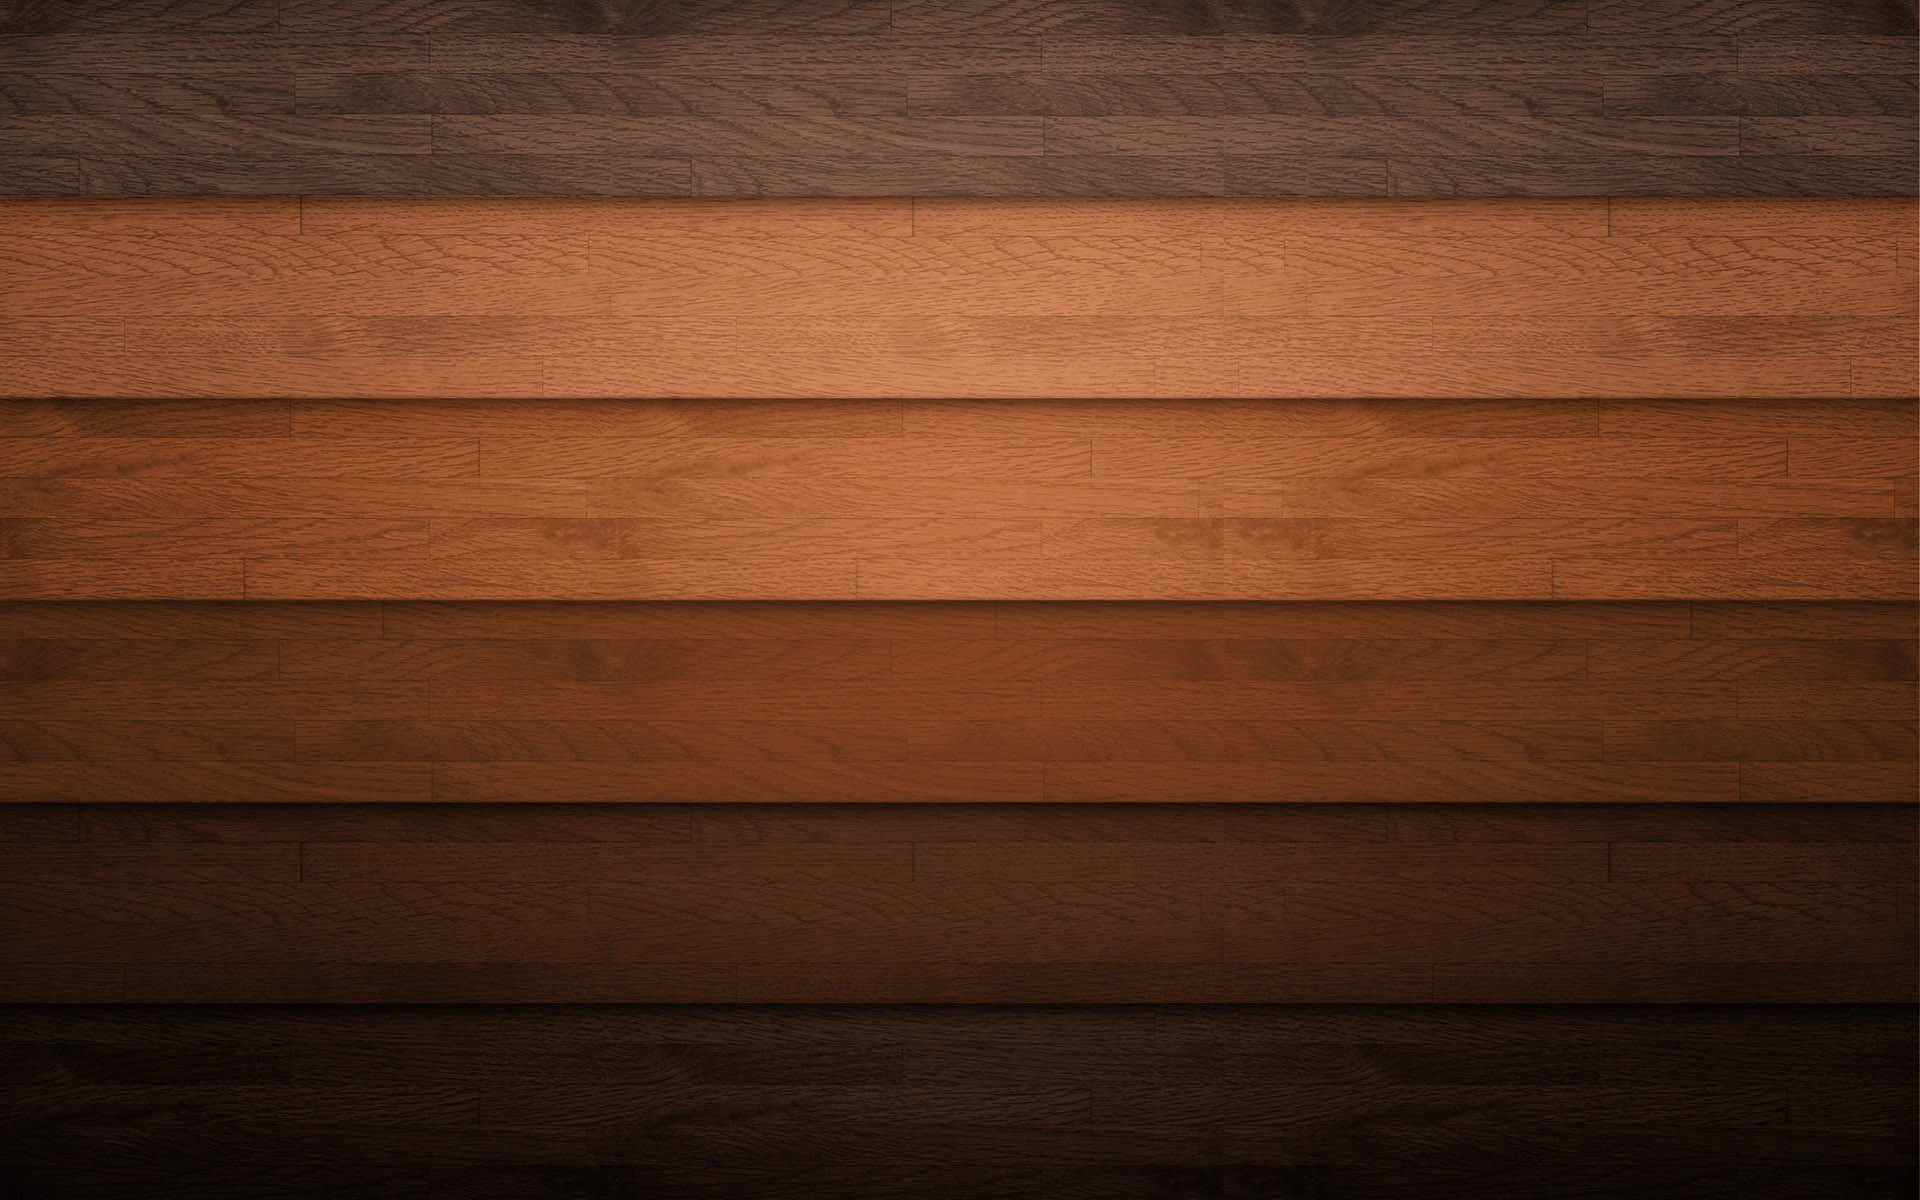 1920x1200 Wooden Wall Wallpaper Cool Picture #m02oma  px 423.51 KB Abstract  Wooden Wall